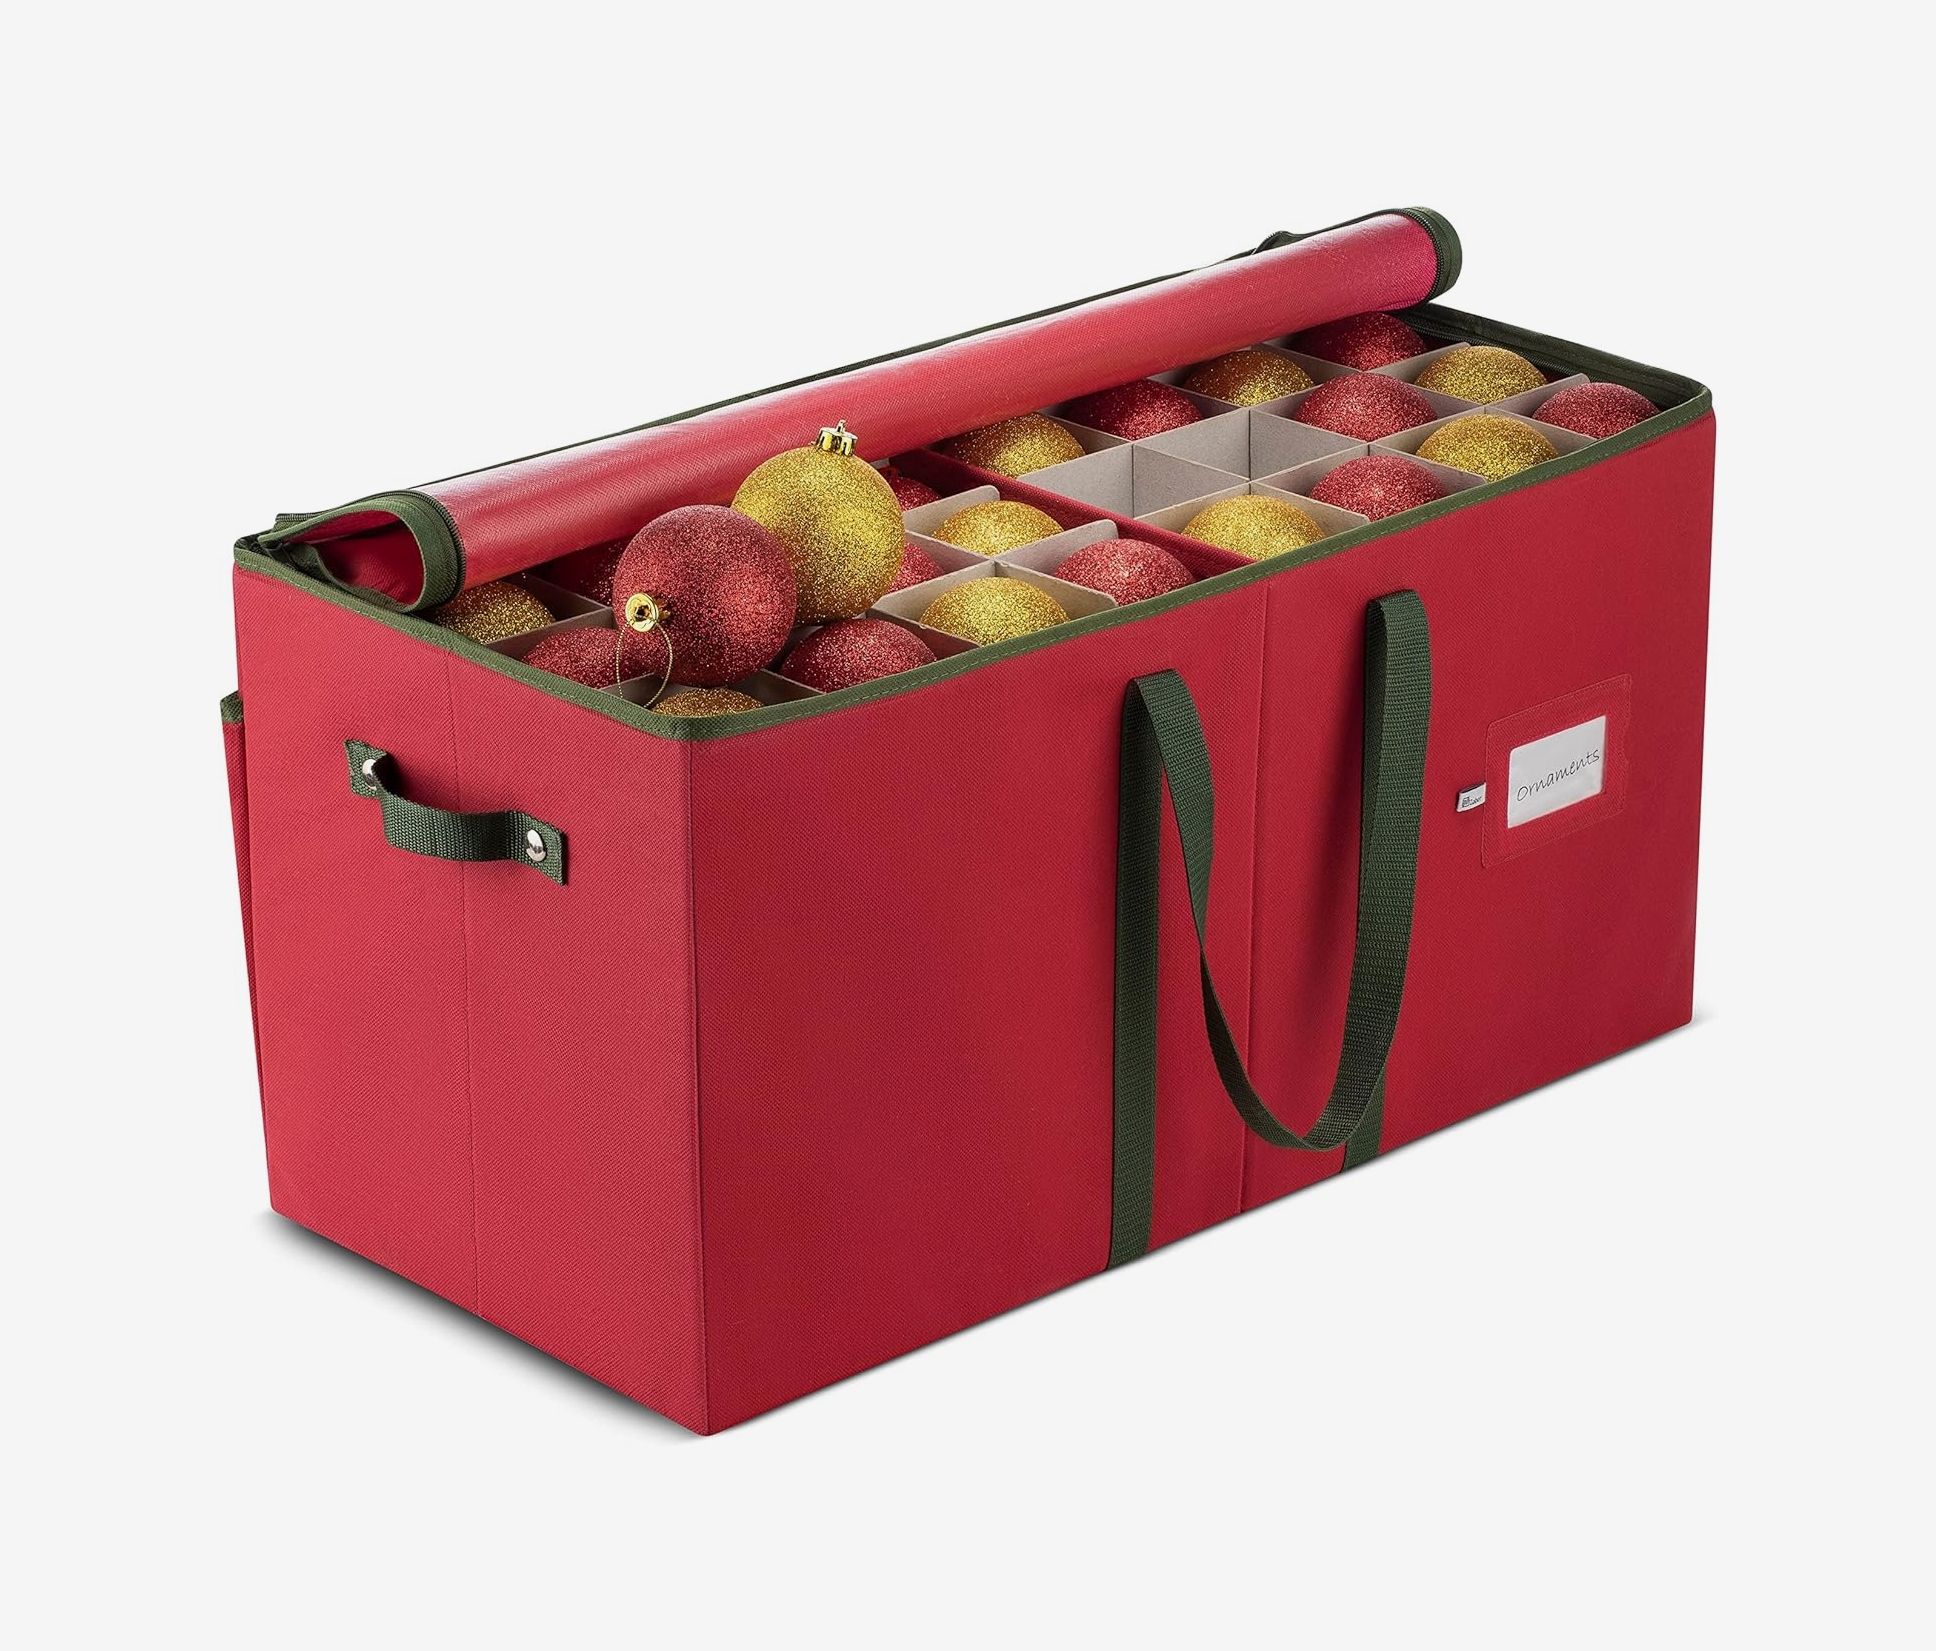  Sterilite 20 Compartment Christmas Holiday Ornament Storage  Box, Red (6 Pack) : Home & Kitchen